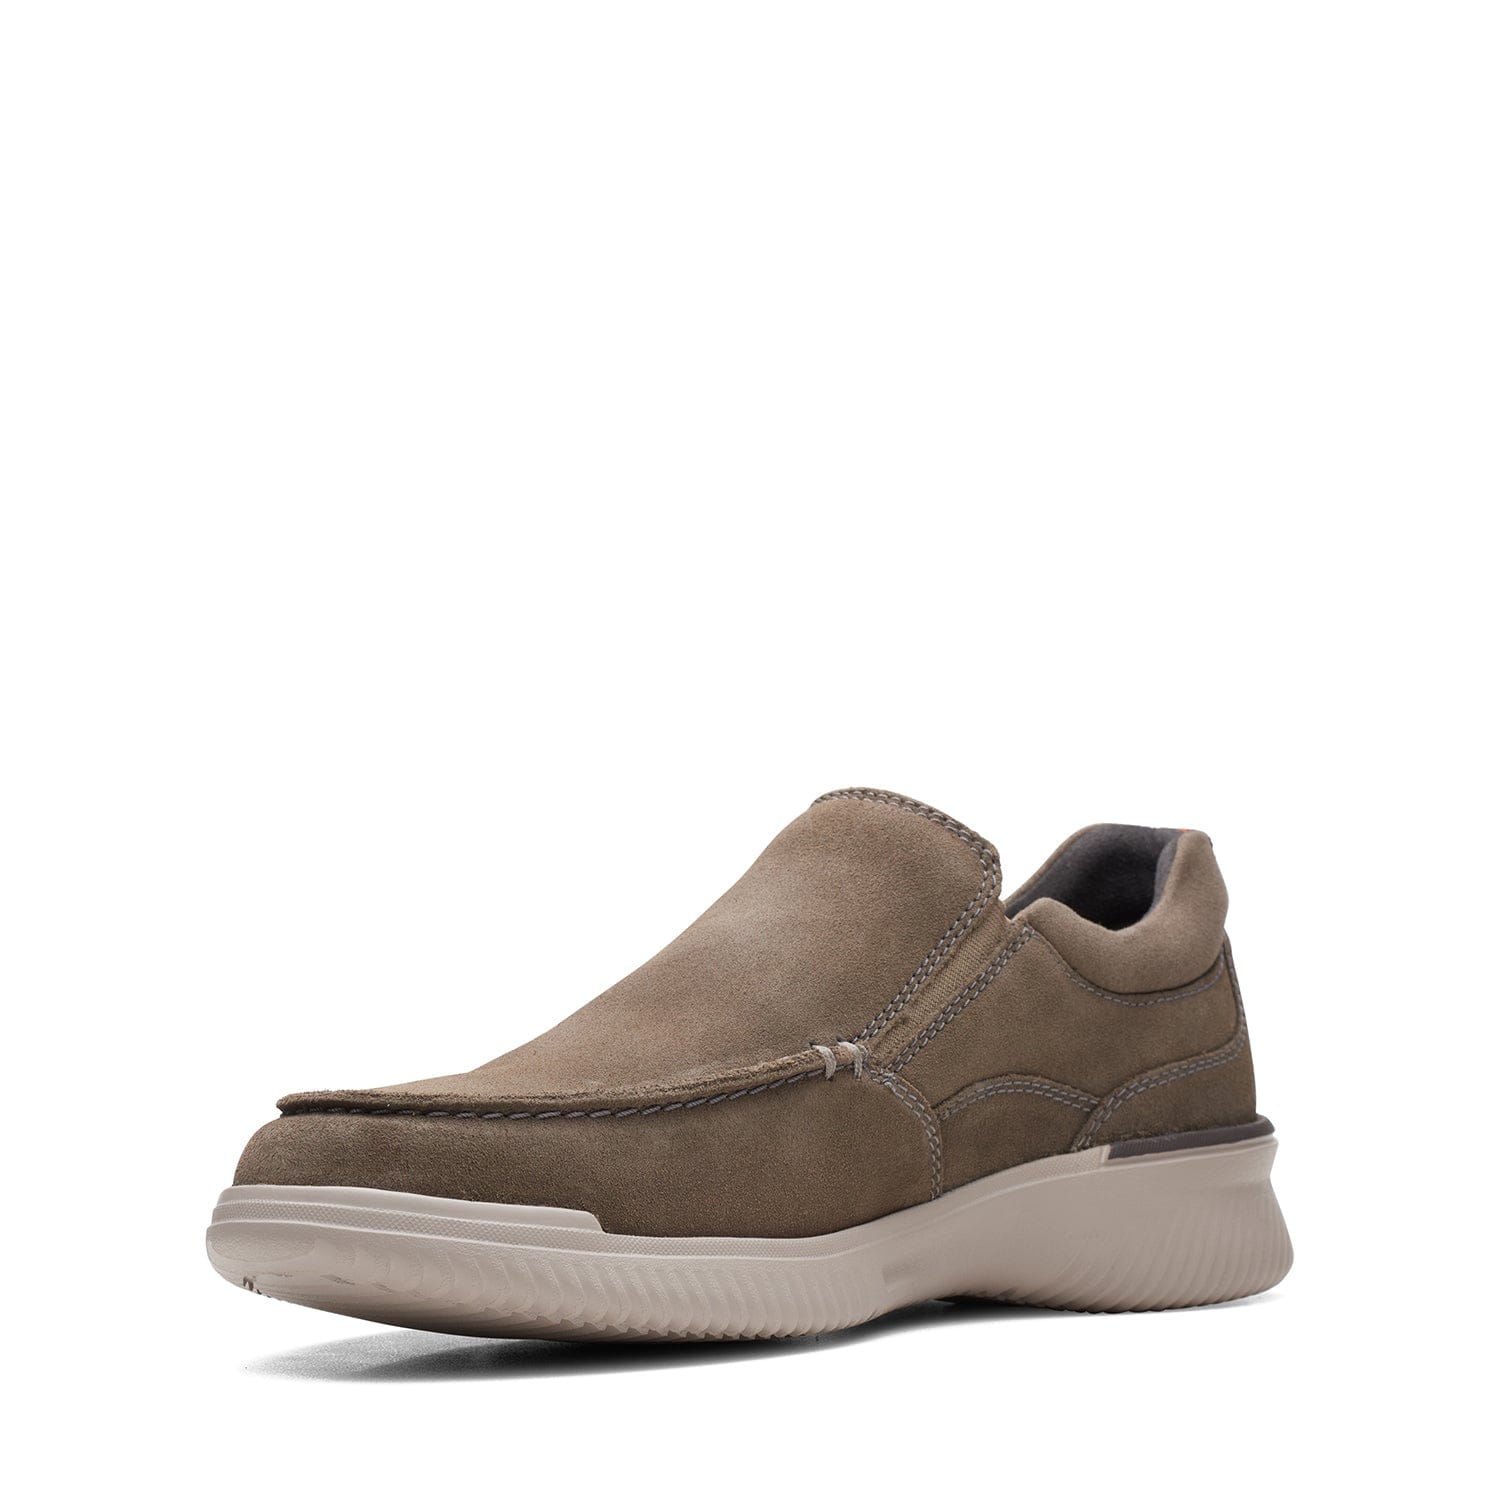 Clarks Donaway Free - Shoes - Stone - 261654428 - H Width (Wide Fit)